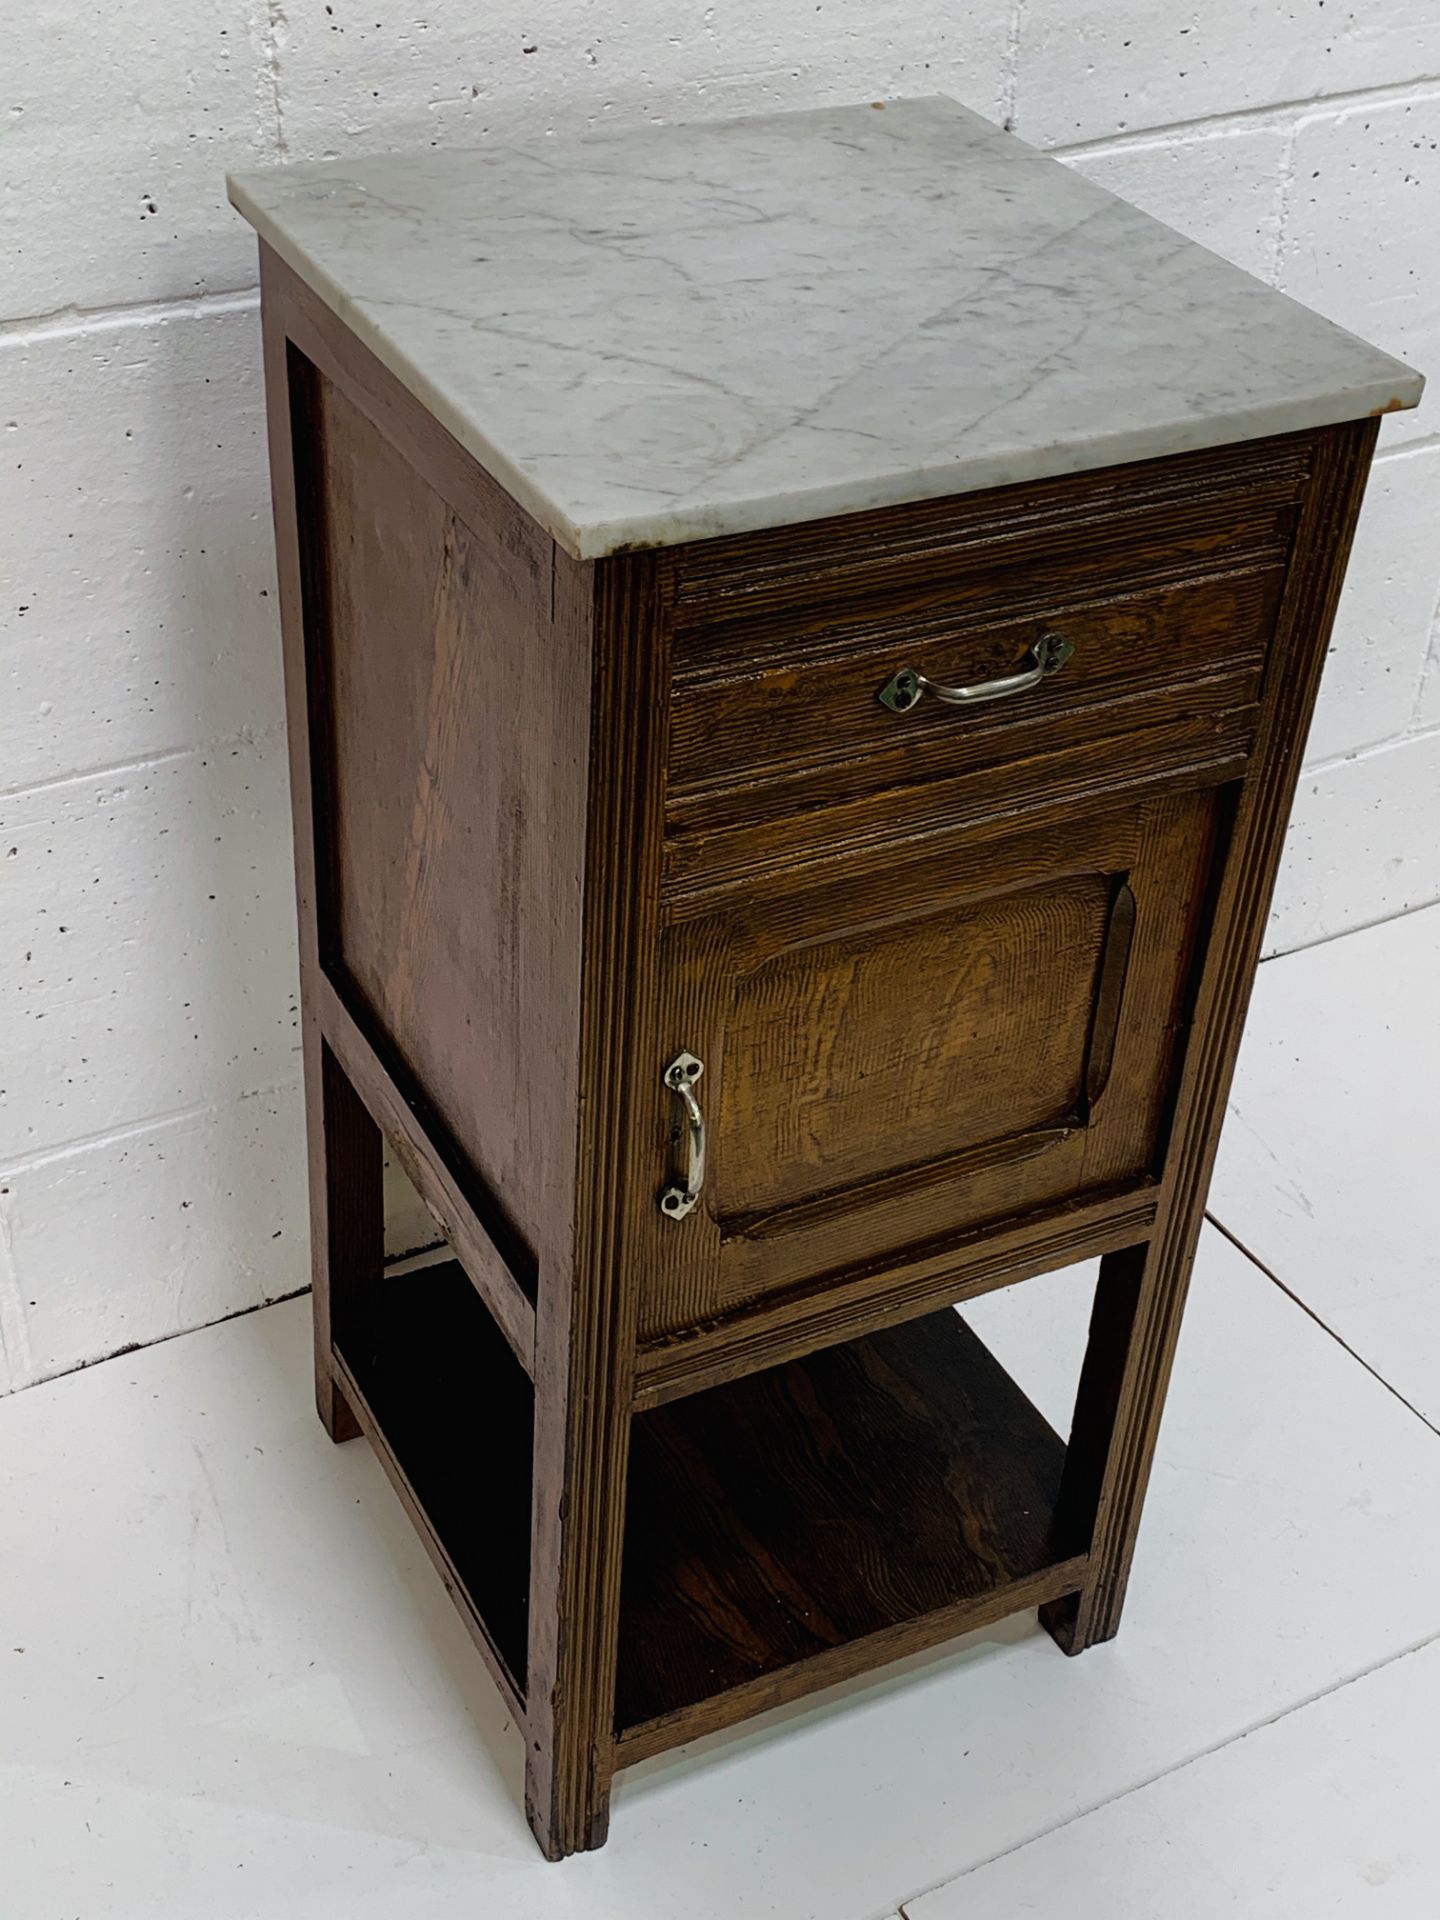 French white marble top cupboard with drawer, 40 x 40 x 84cms. - Image 3 of 3